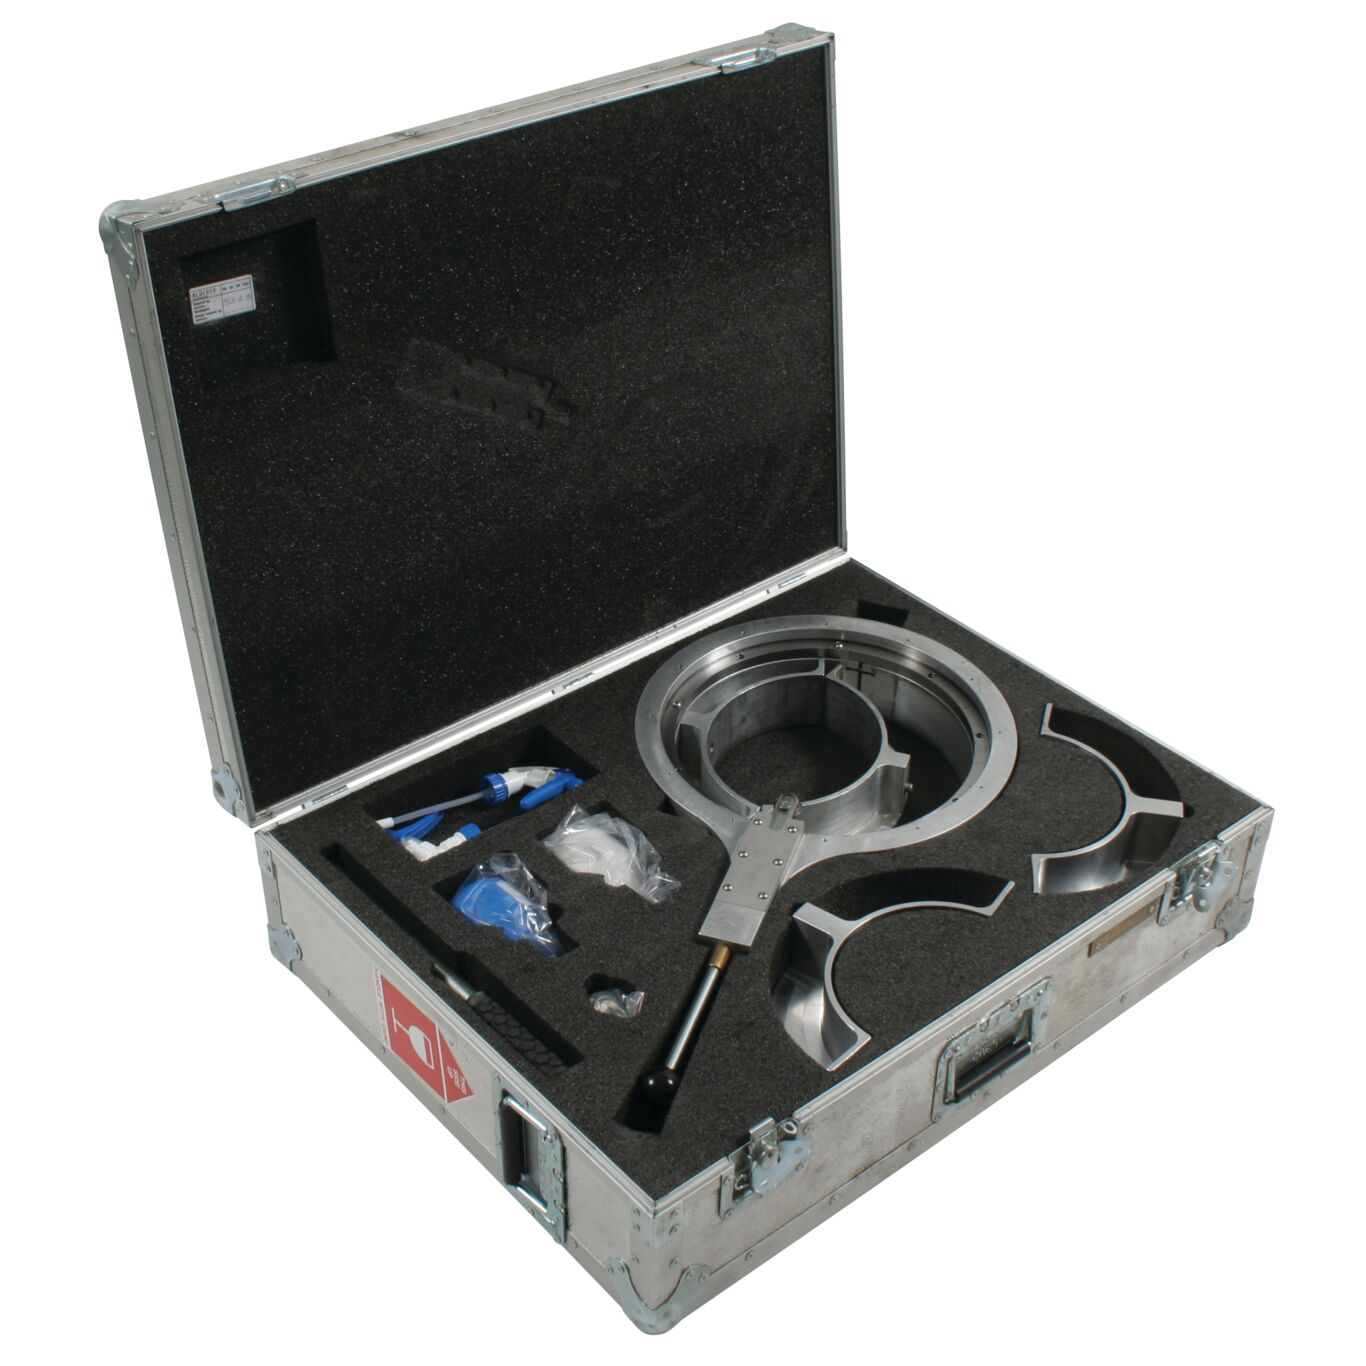 Product Image - Pipe cutter-electrical